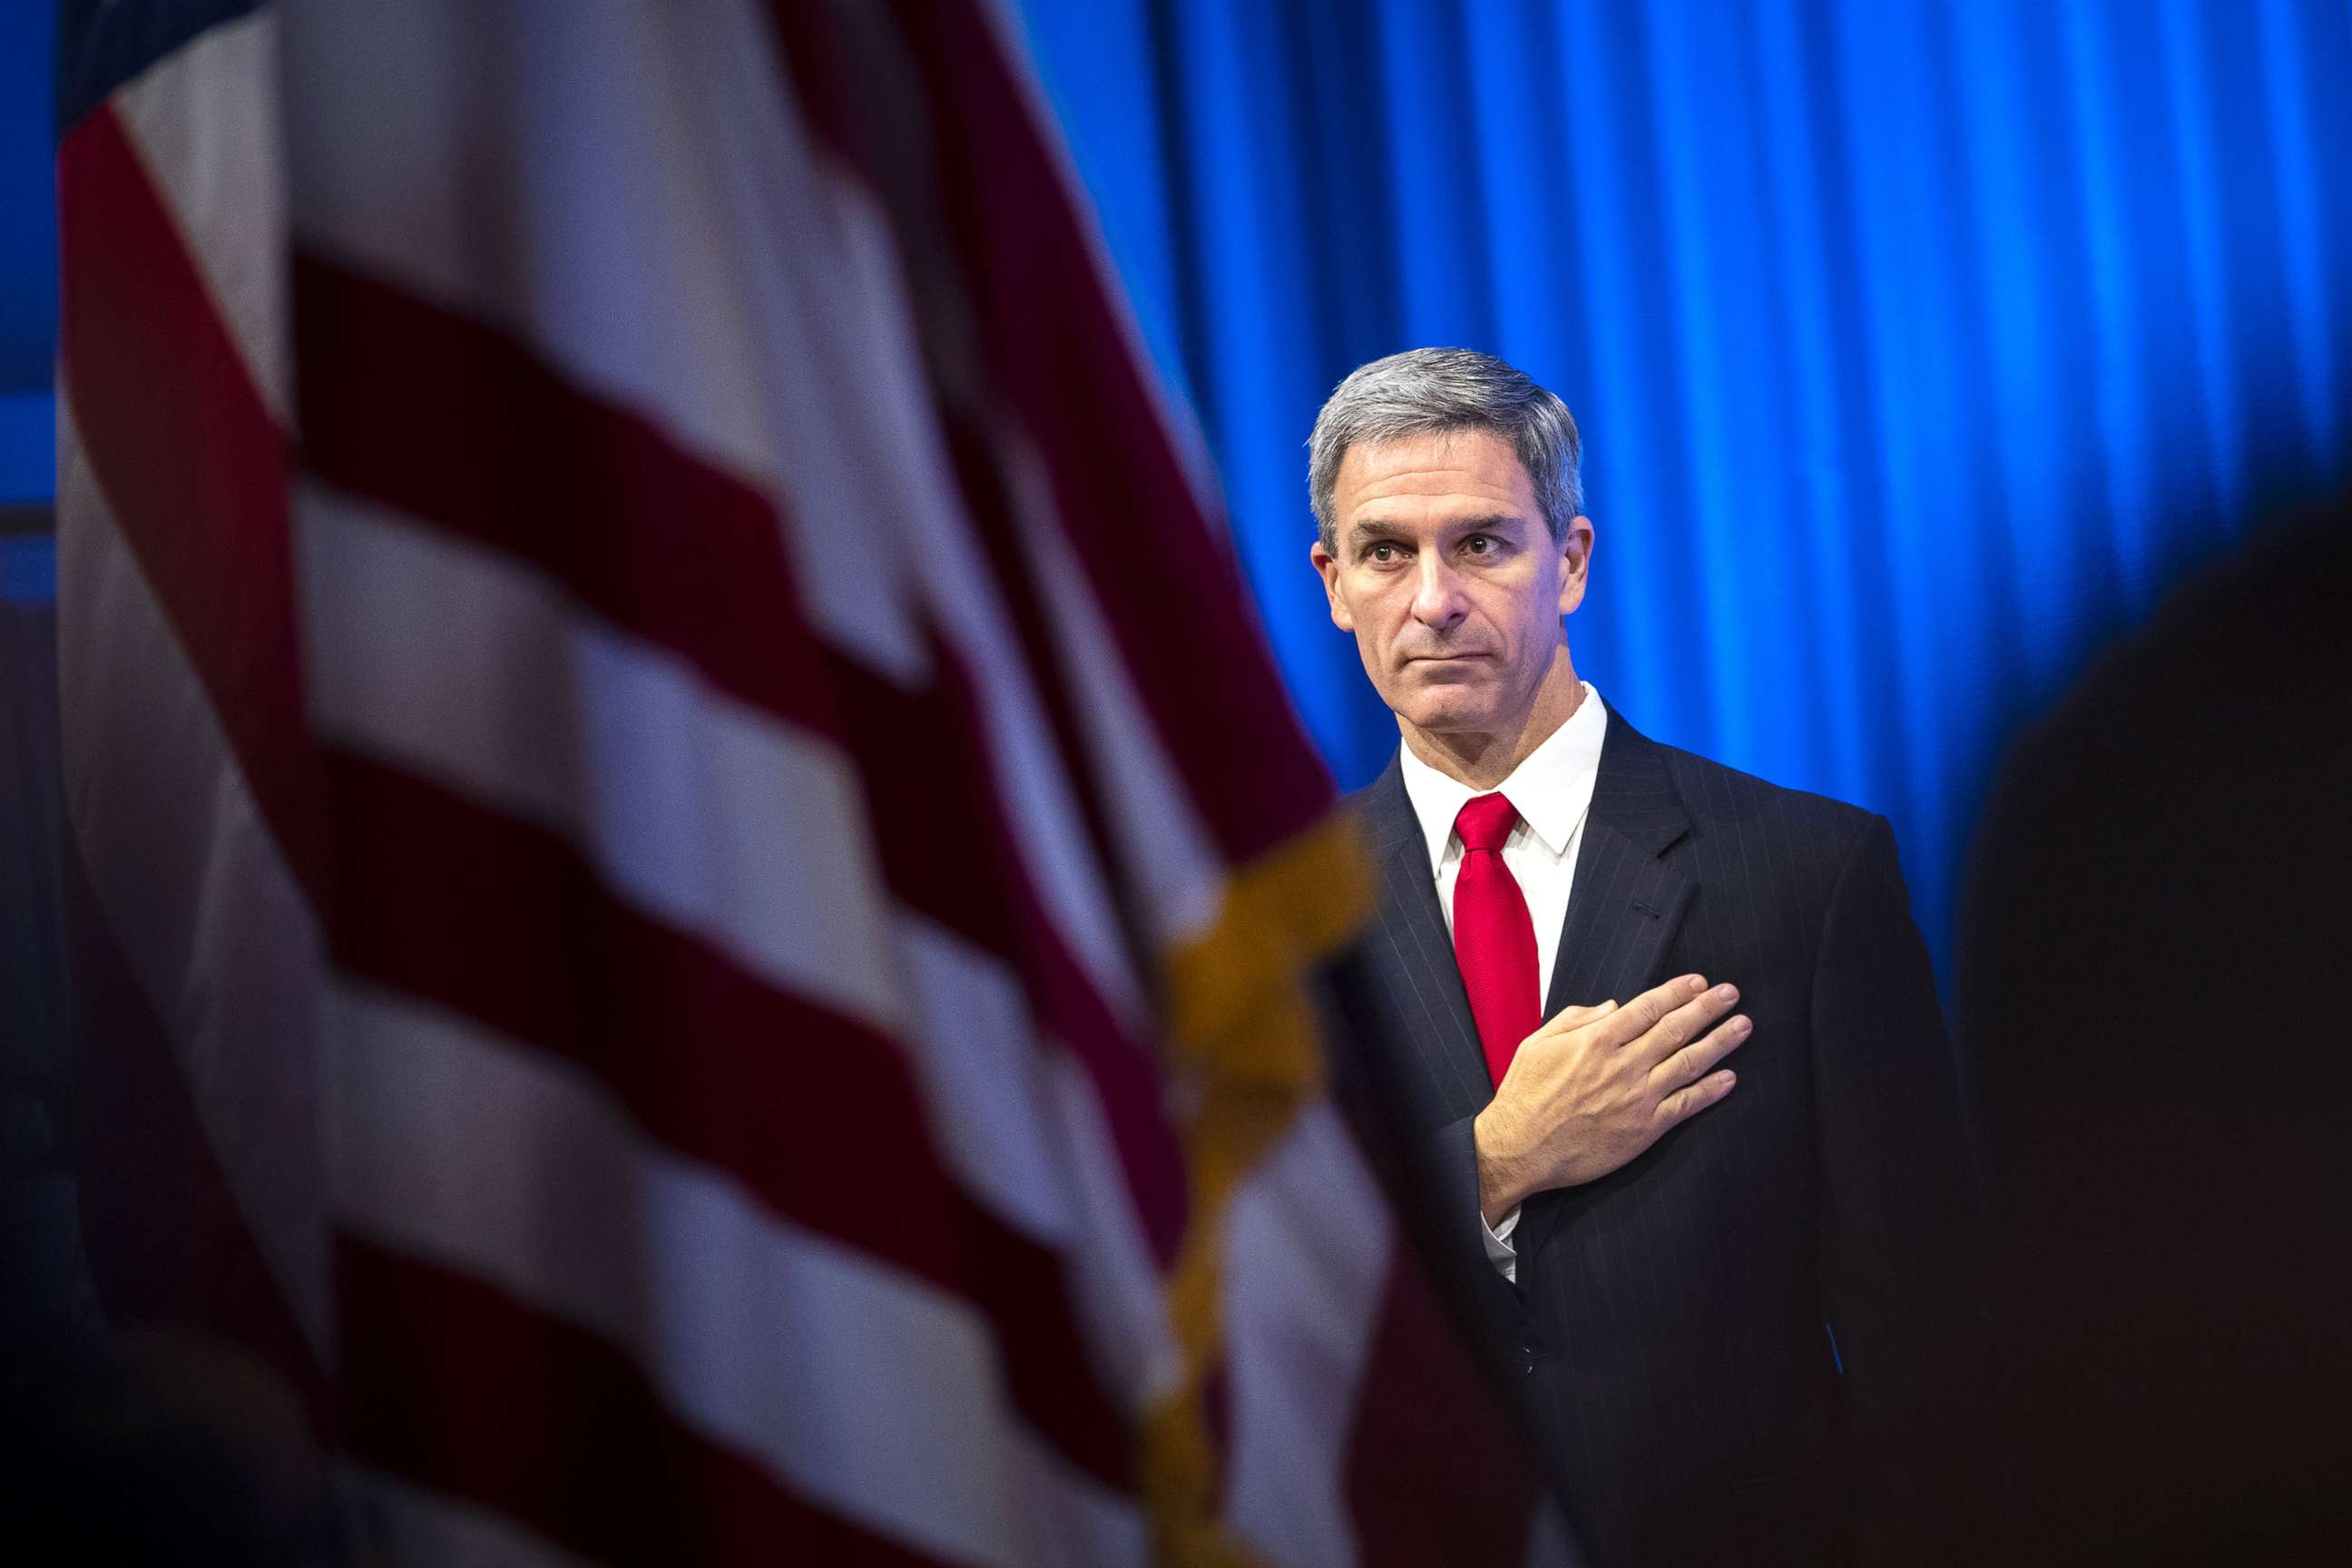 PHOTO: Acting Director of the U.S. Citizenship and Immigration Services (USCIS), Ken Cuccinelli leaves the lectern after speaking during a naturalization ceremony on July 2, 2019, in New York City.